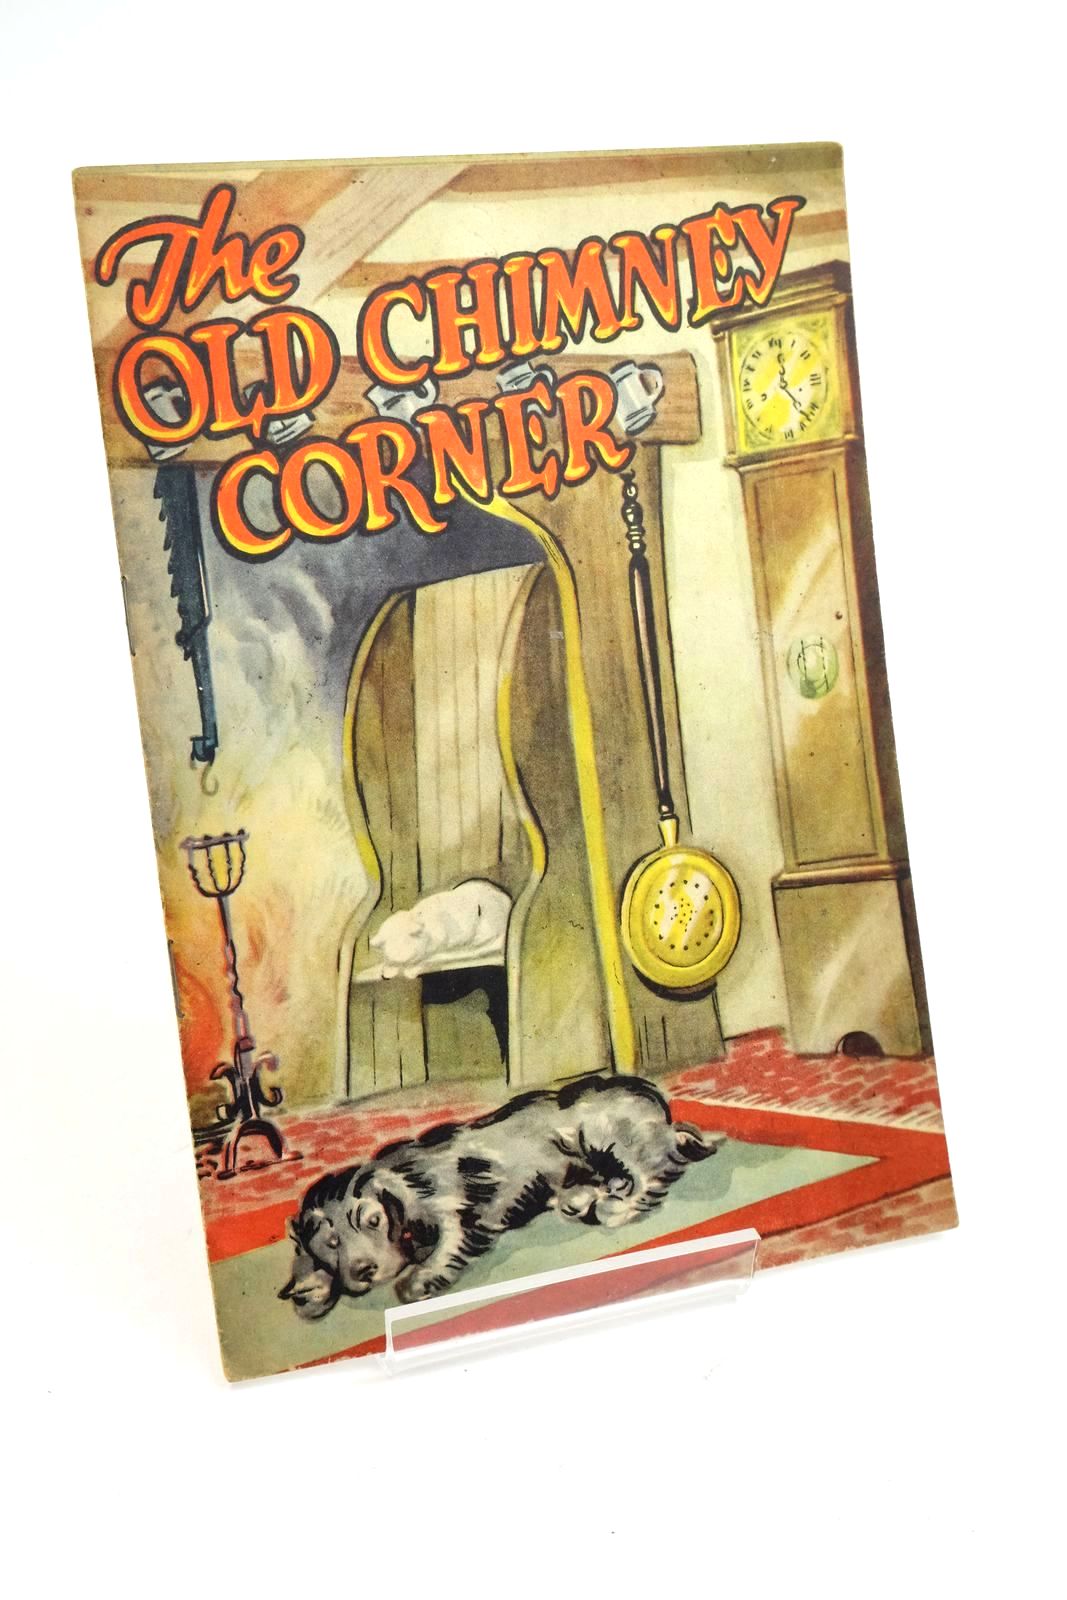 Photo of THE OLD CHIMNEY CORNER published by Renwick of Otley (STOCK CODE: 1322217)  for sale by Stella & Rose's Books